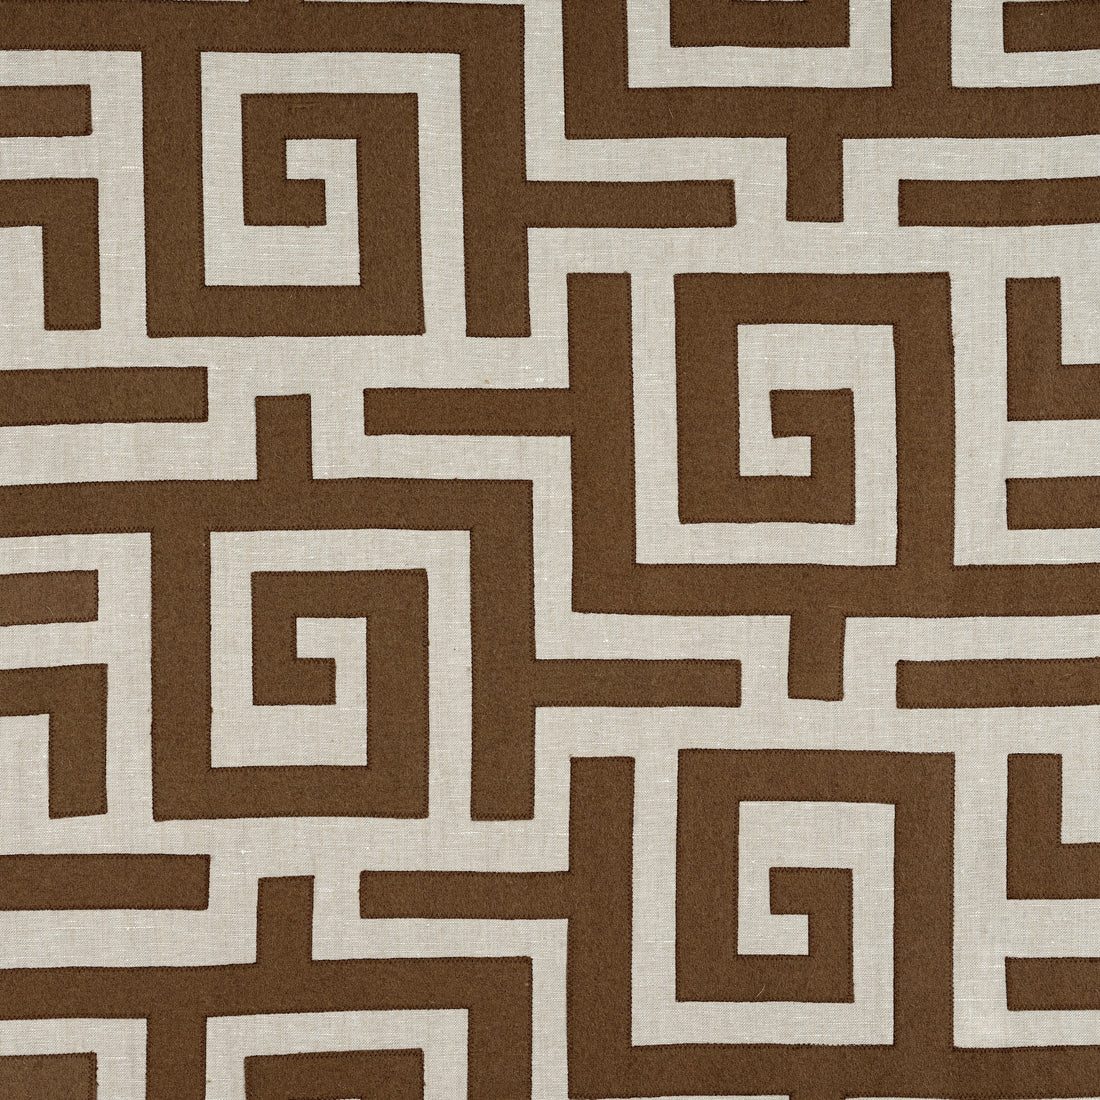 Tulum Applique fabric in brown on natural color - pattern number W713226 - by Thibaut in the Mesa collection